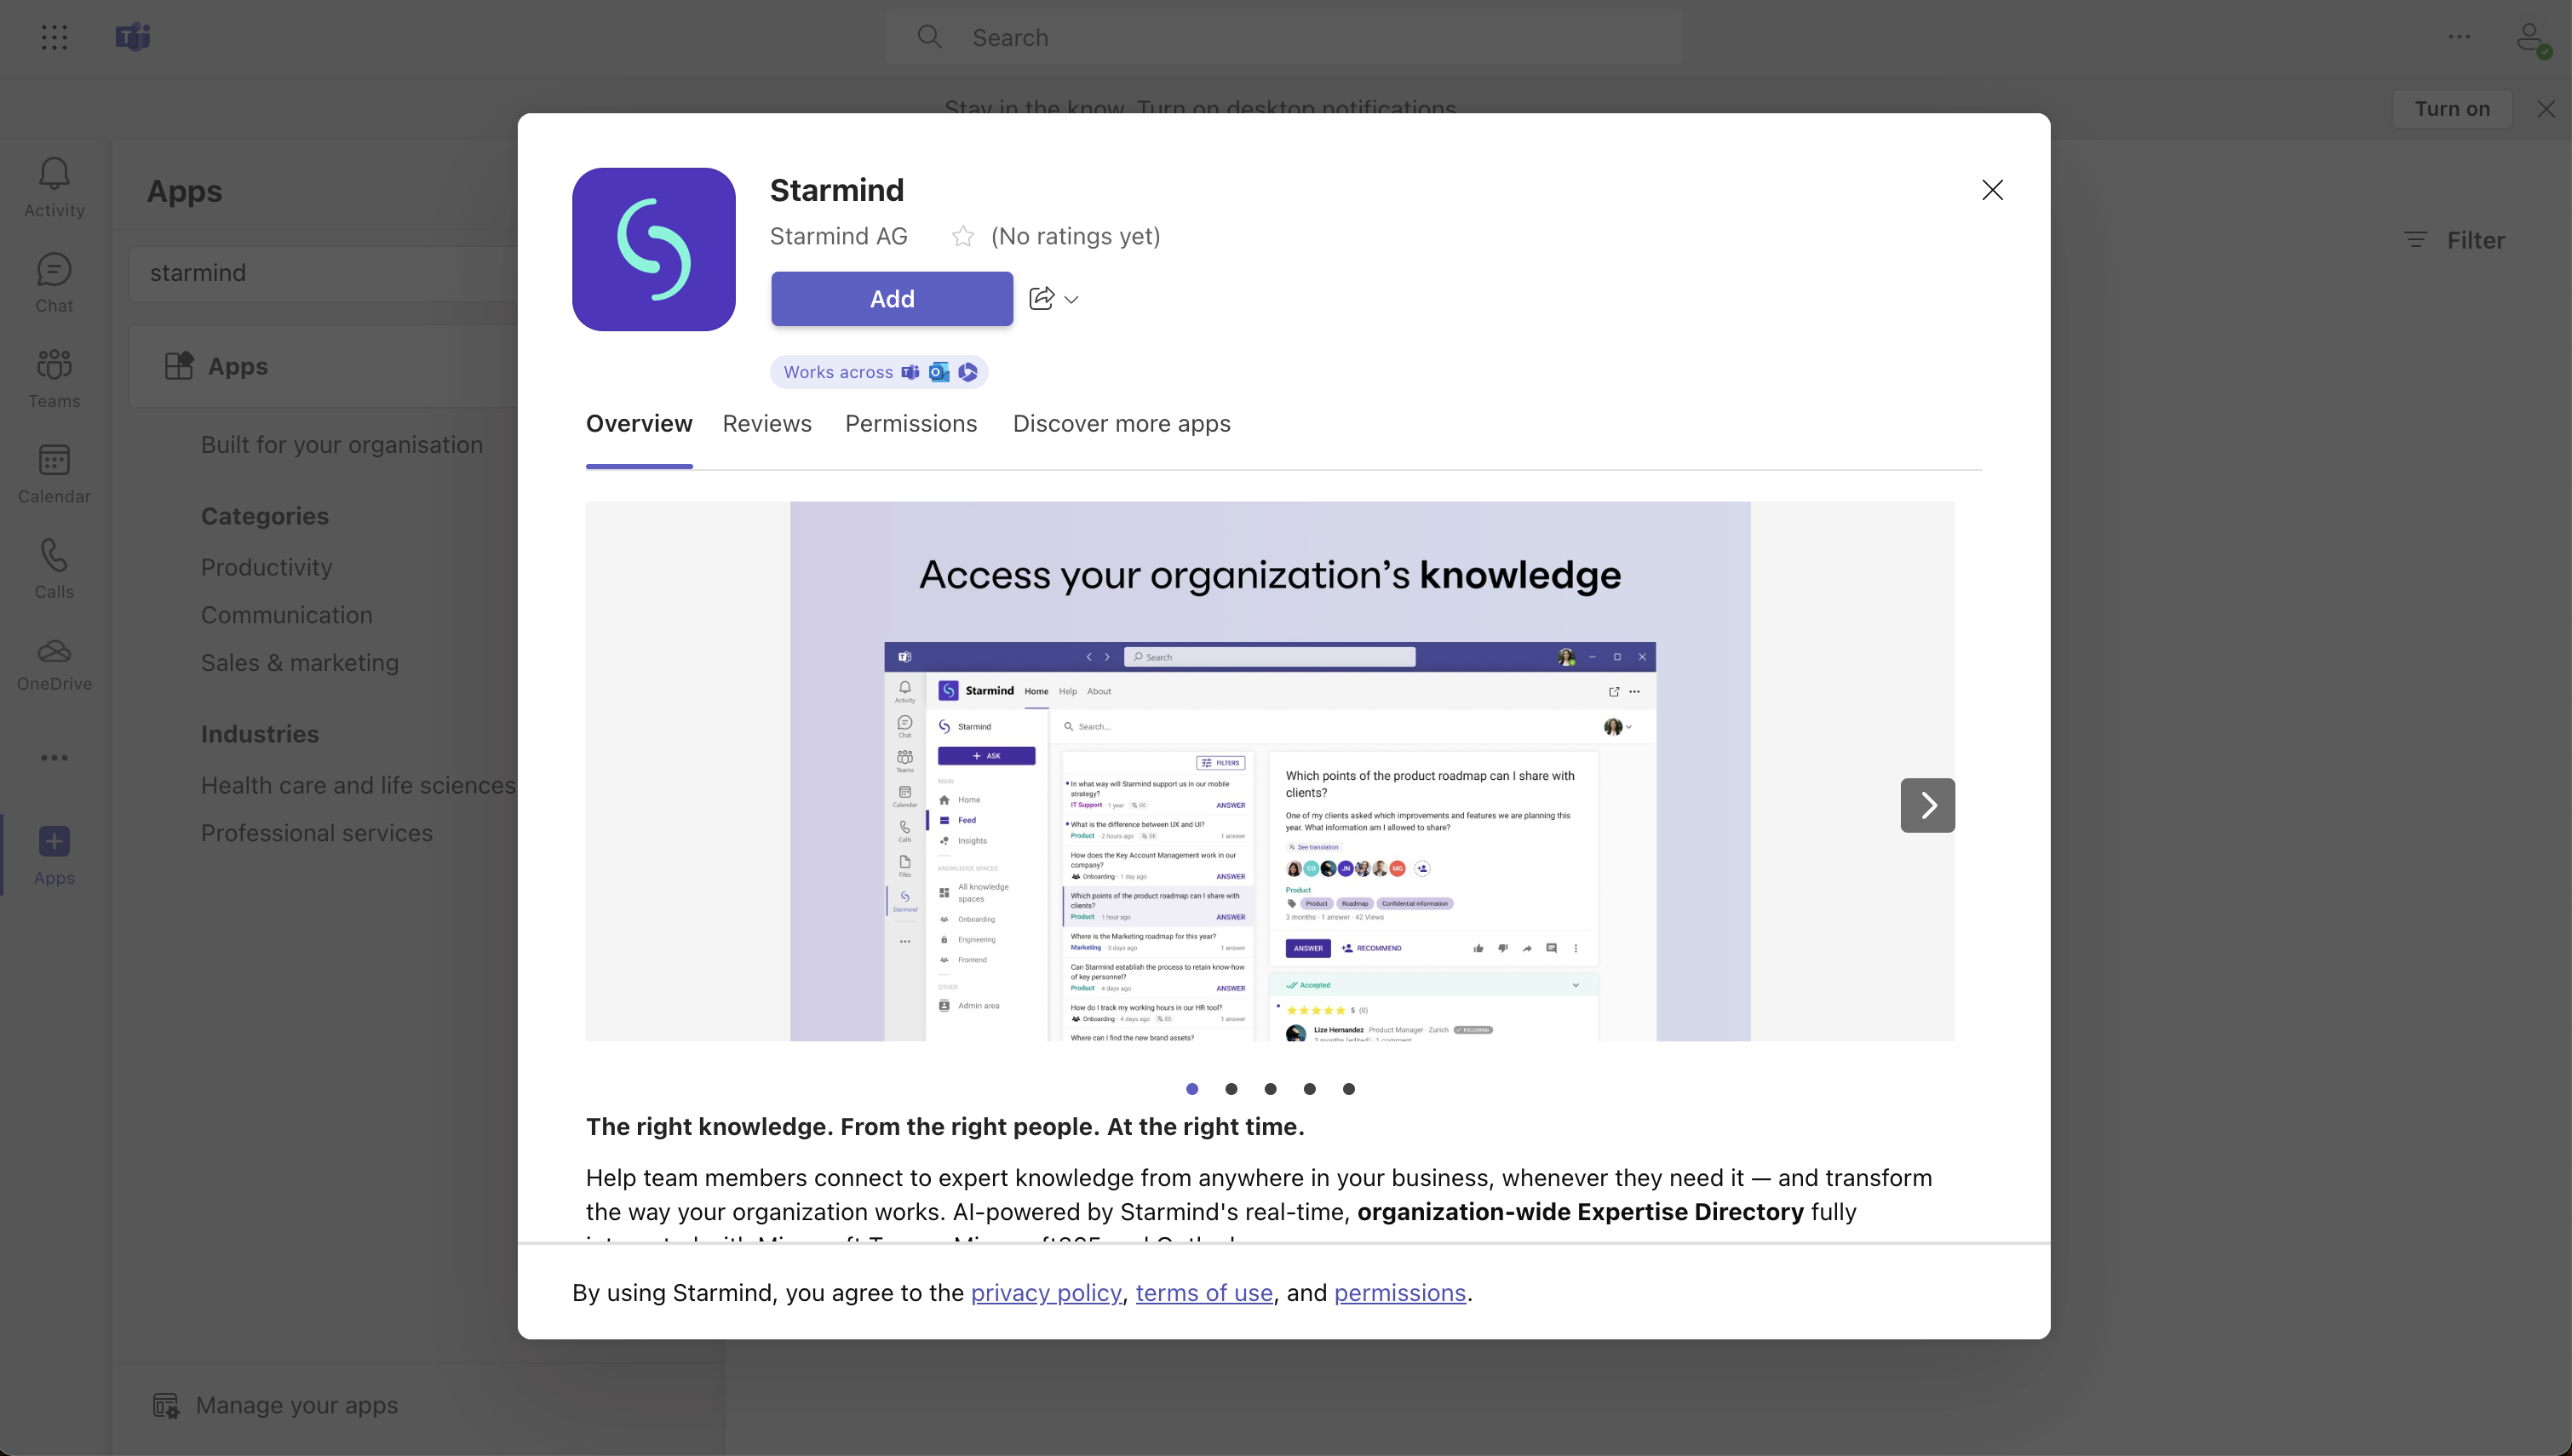 In any Microsoft Teams client, add the Starmind Personal App